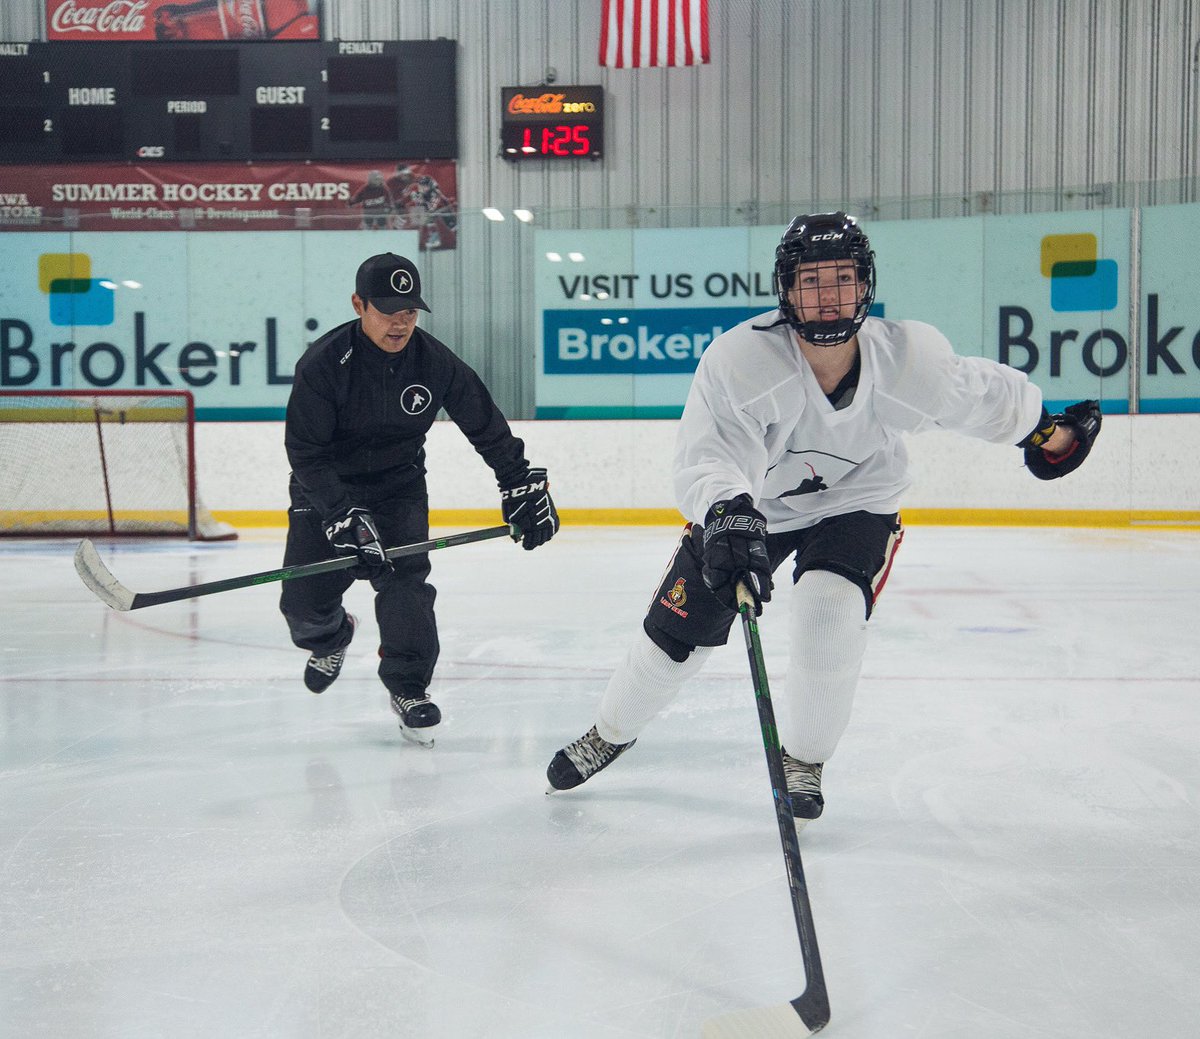 All the best on-ice movers master their “Glide Platform”. Glide makes every movement pattern easier to perform while maintaining momentum! 
Glide paired with quickness of the feet will help you maximize your speed and get the most length out of each stride! 
#hockeytraining #CCM